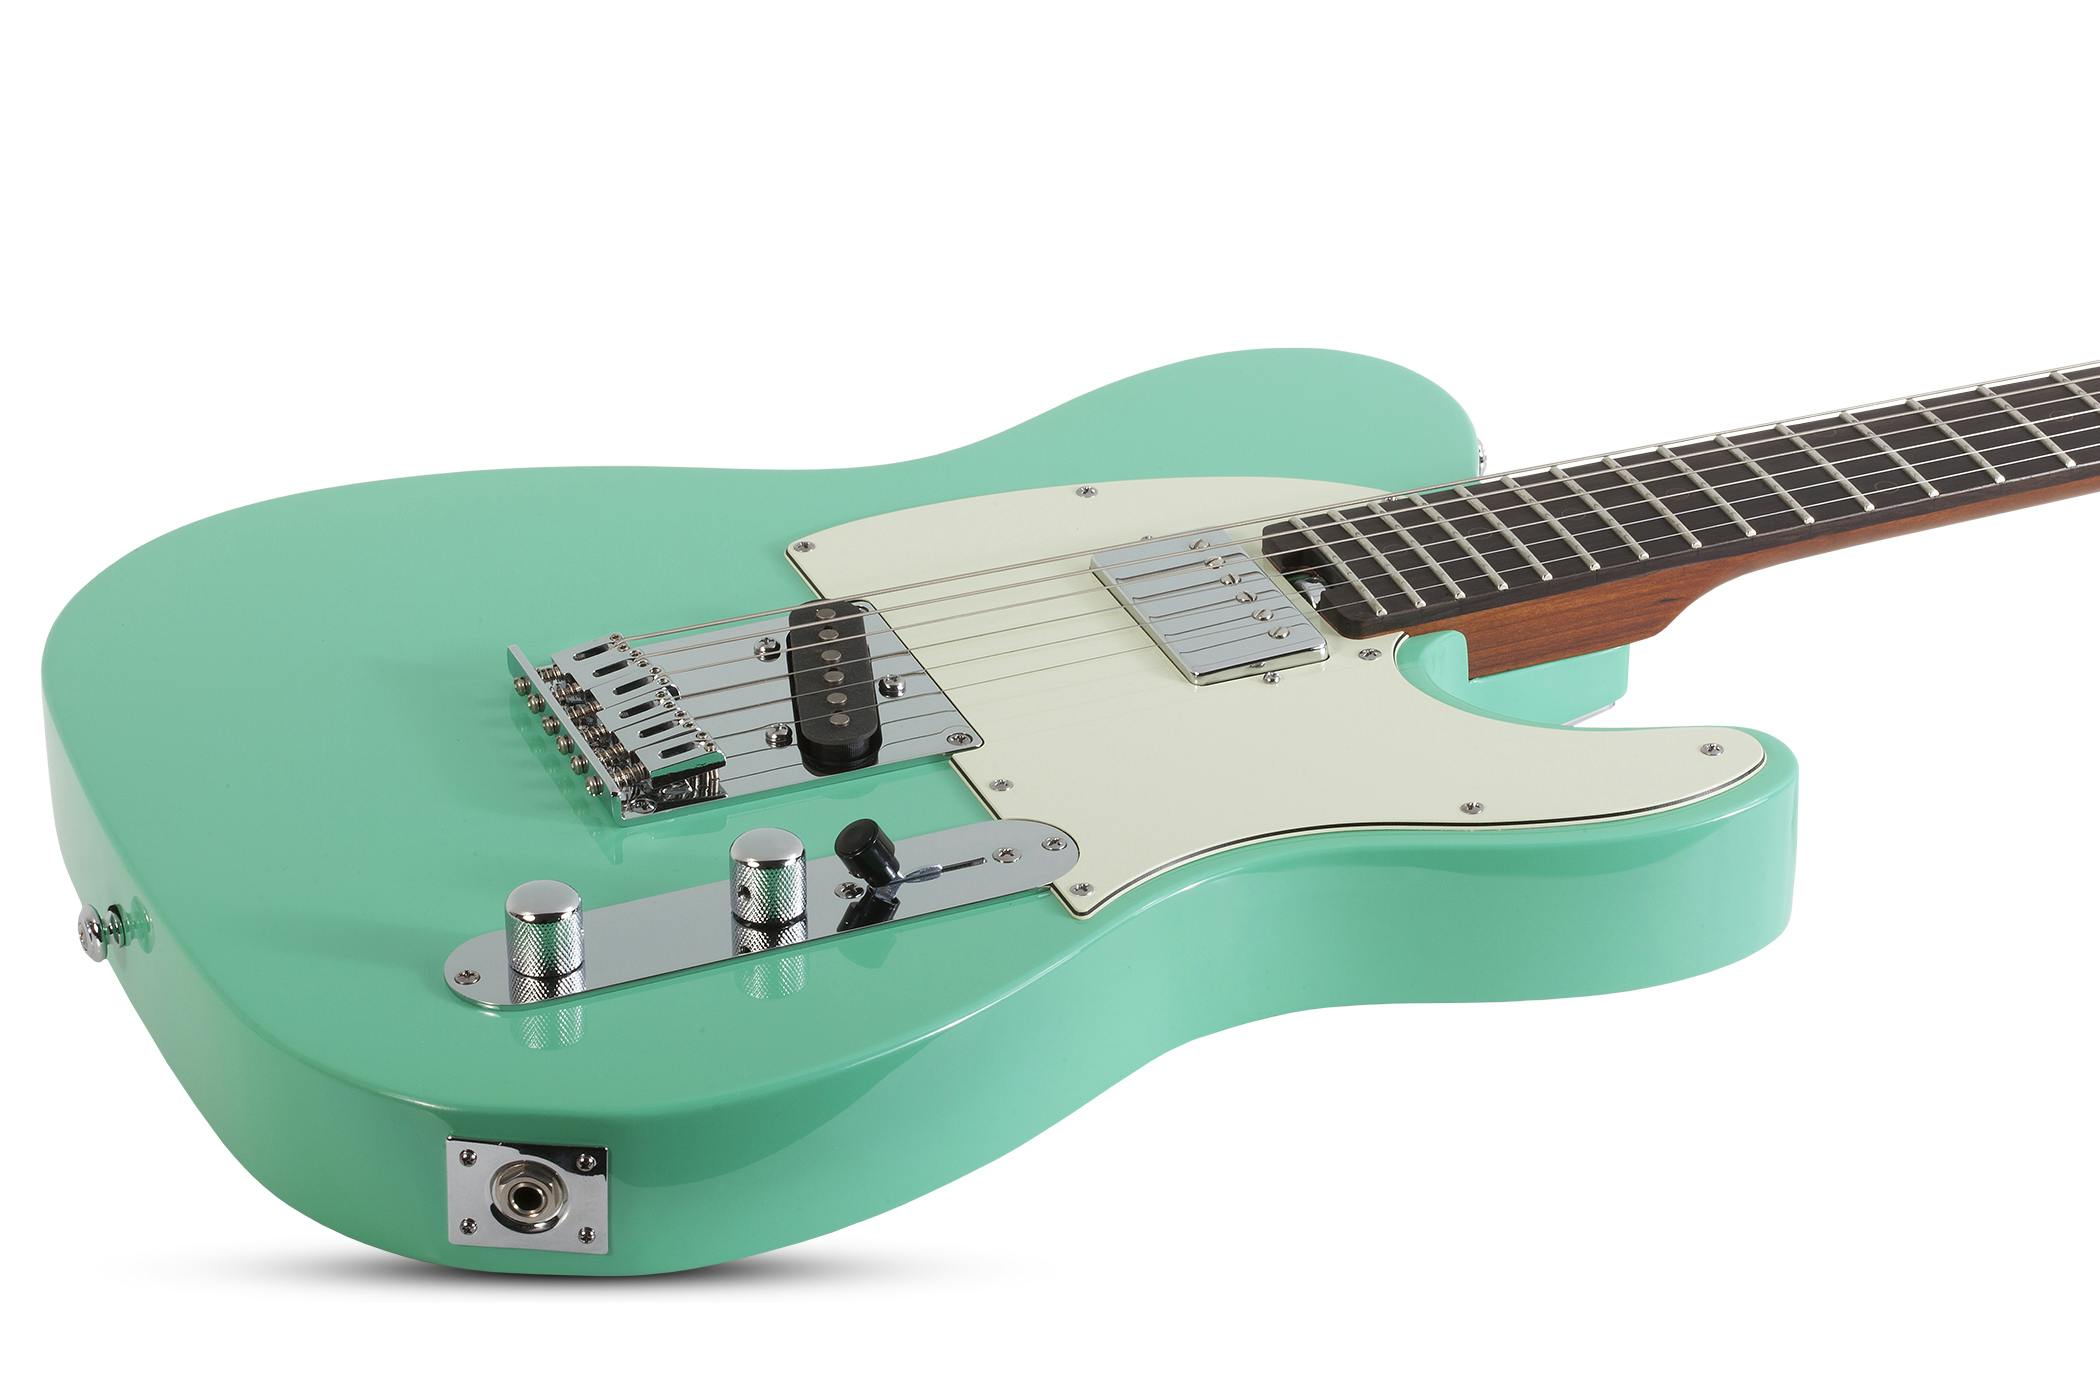 Schecter Nick Johnston PT Electric Guitar in Atomic Green 